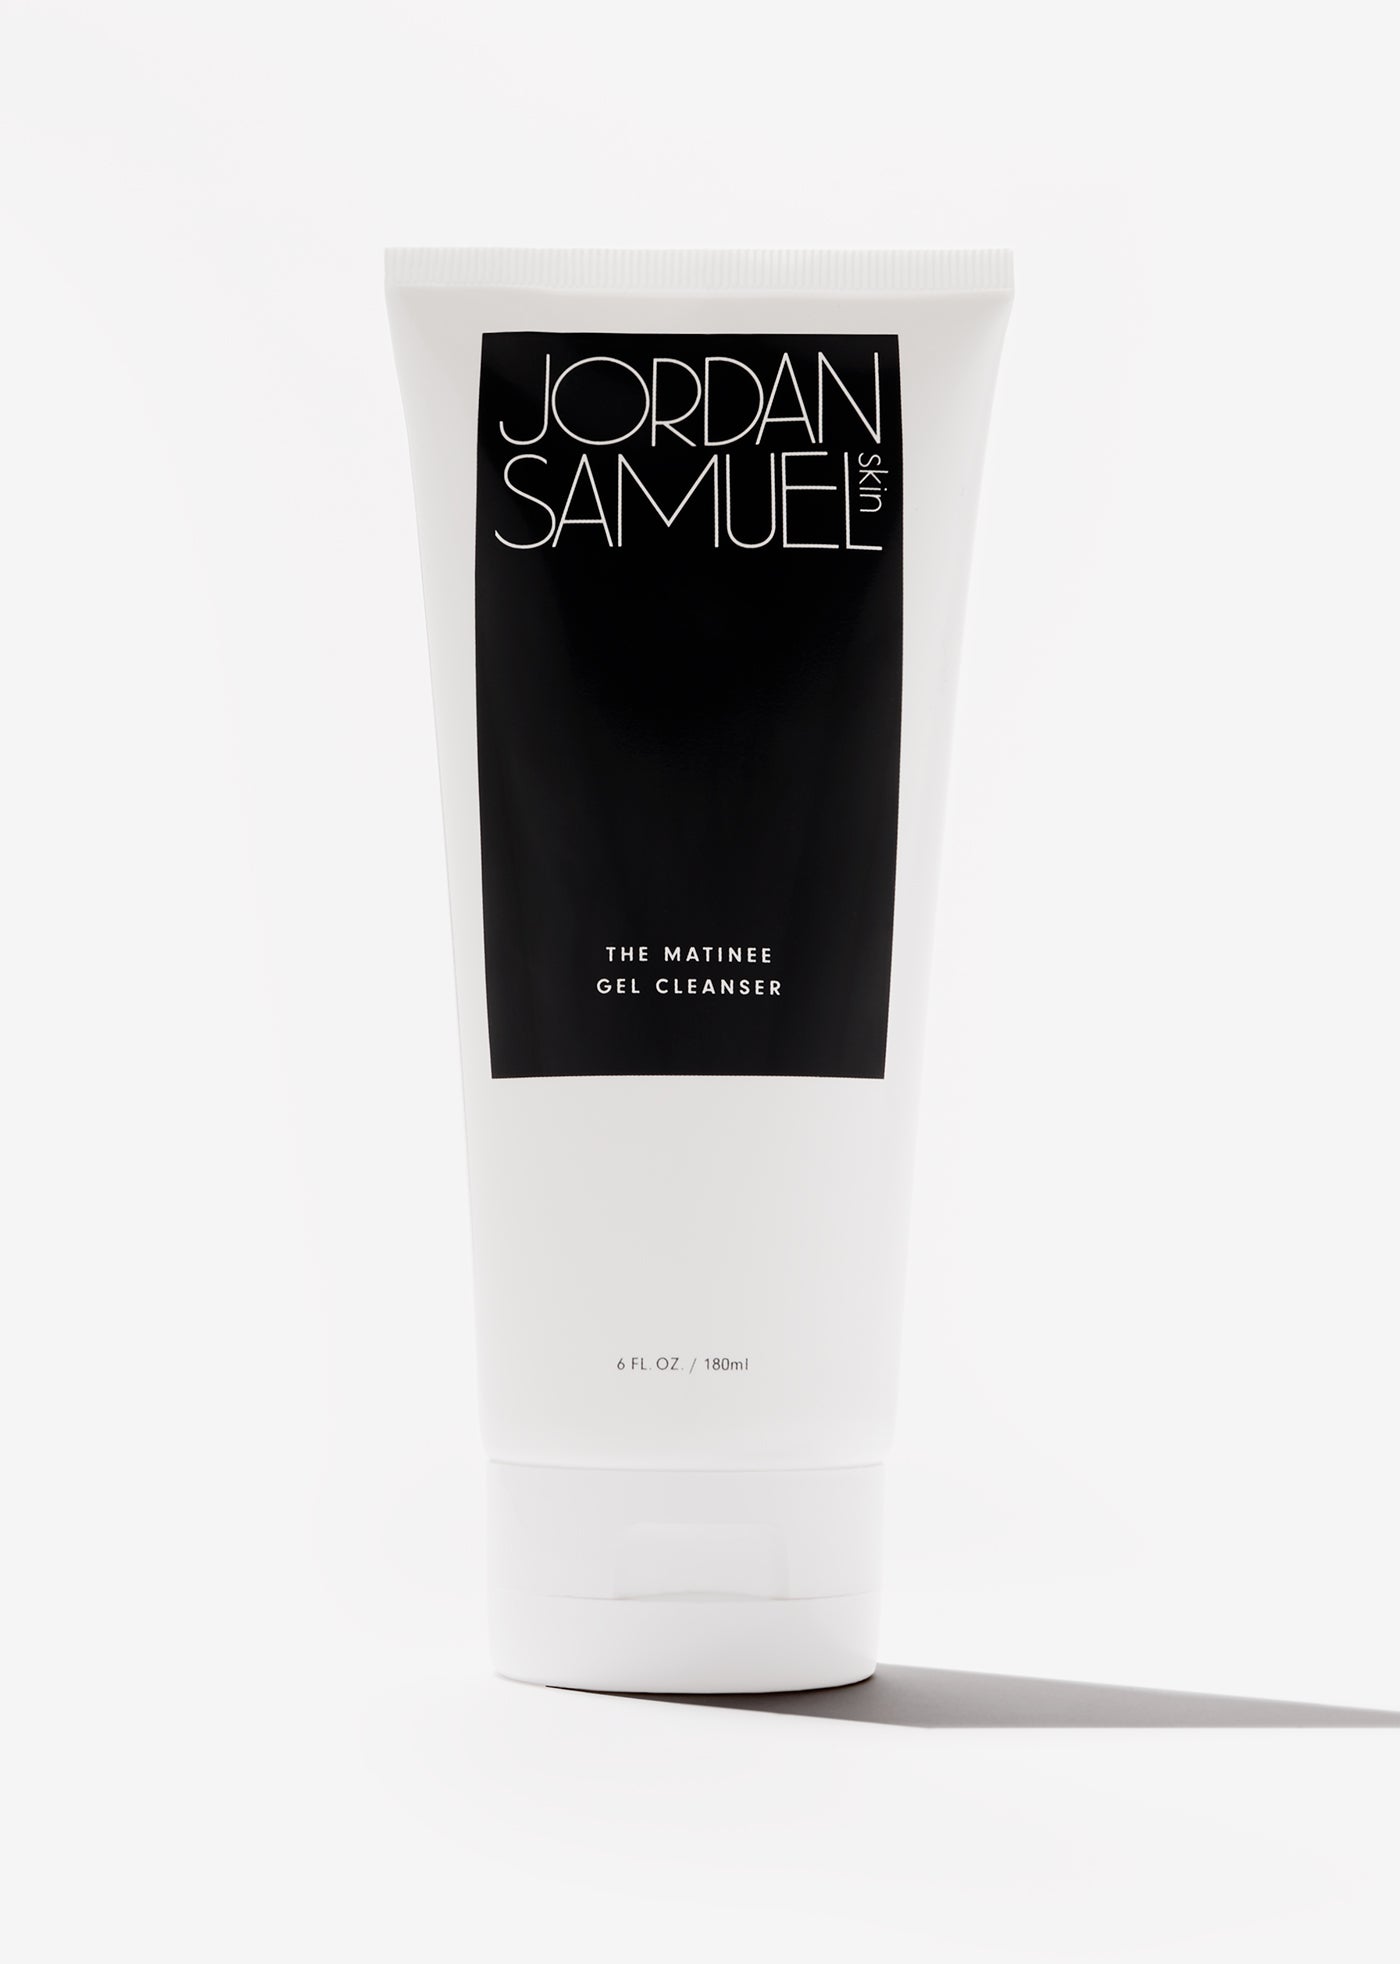 The Matinee Gel Cleanser in white plastic tube, six-fluid-ounce/180 milliliters.